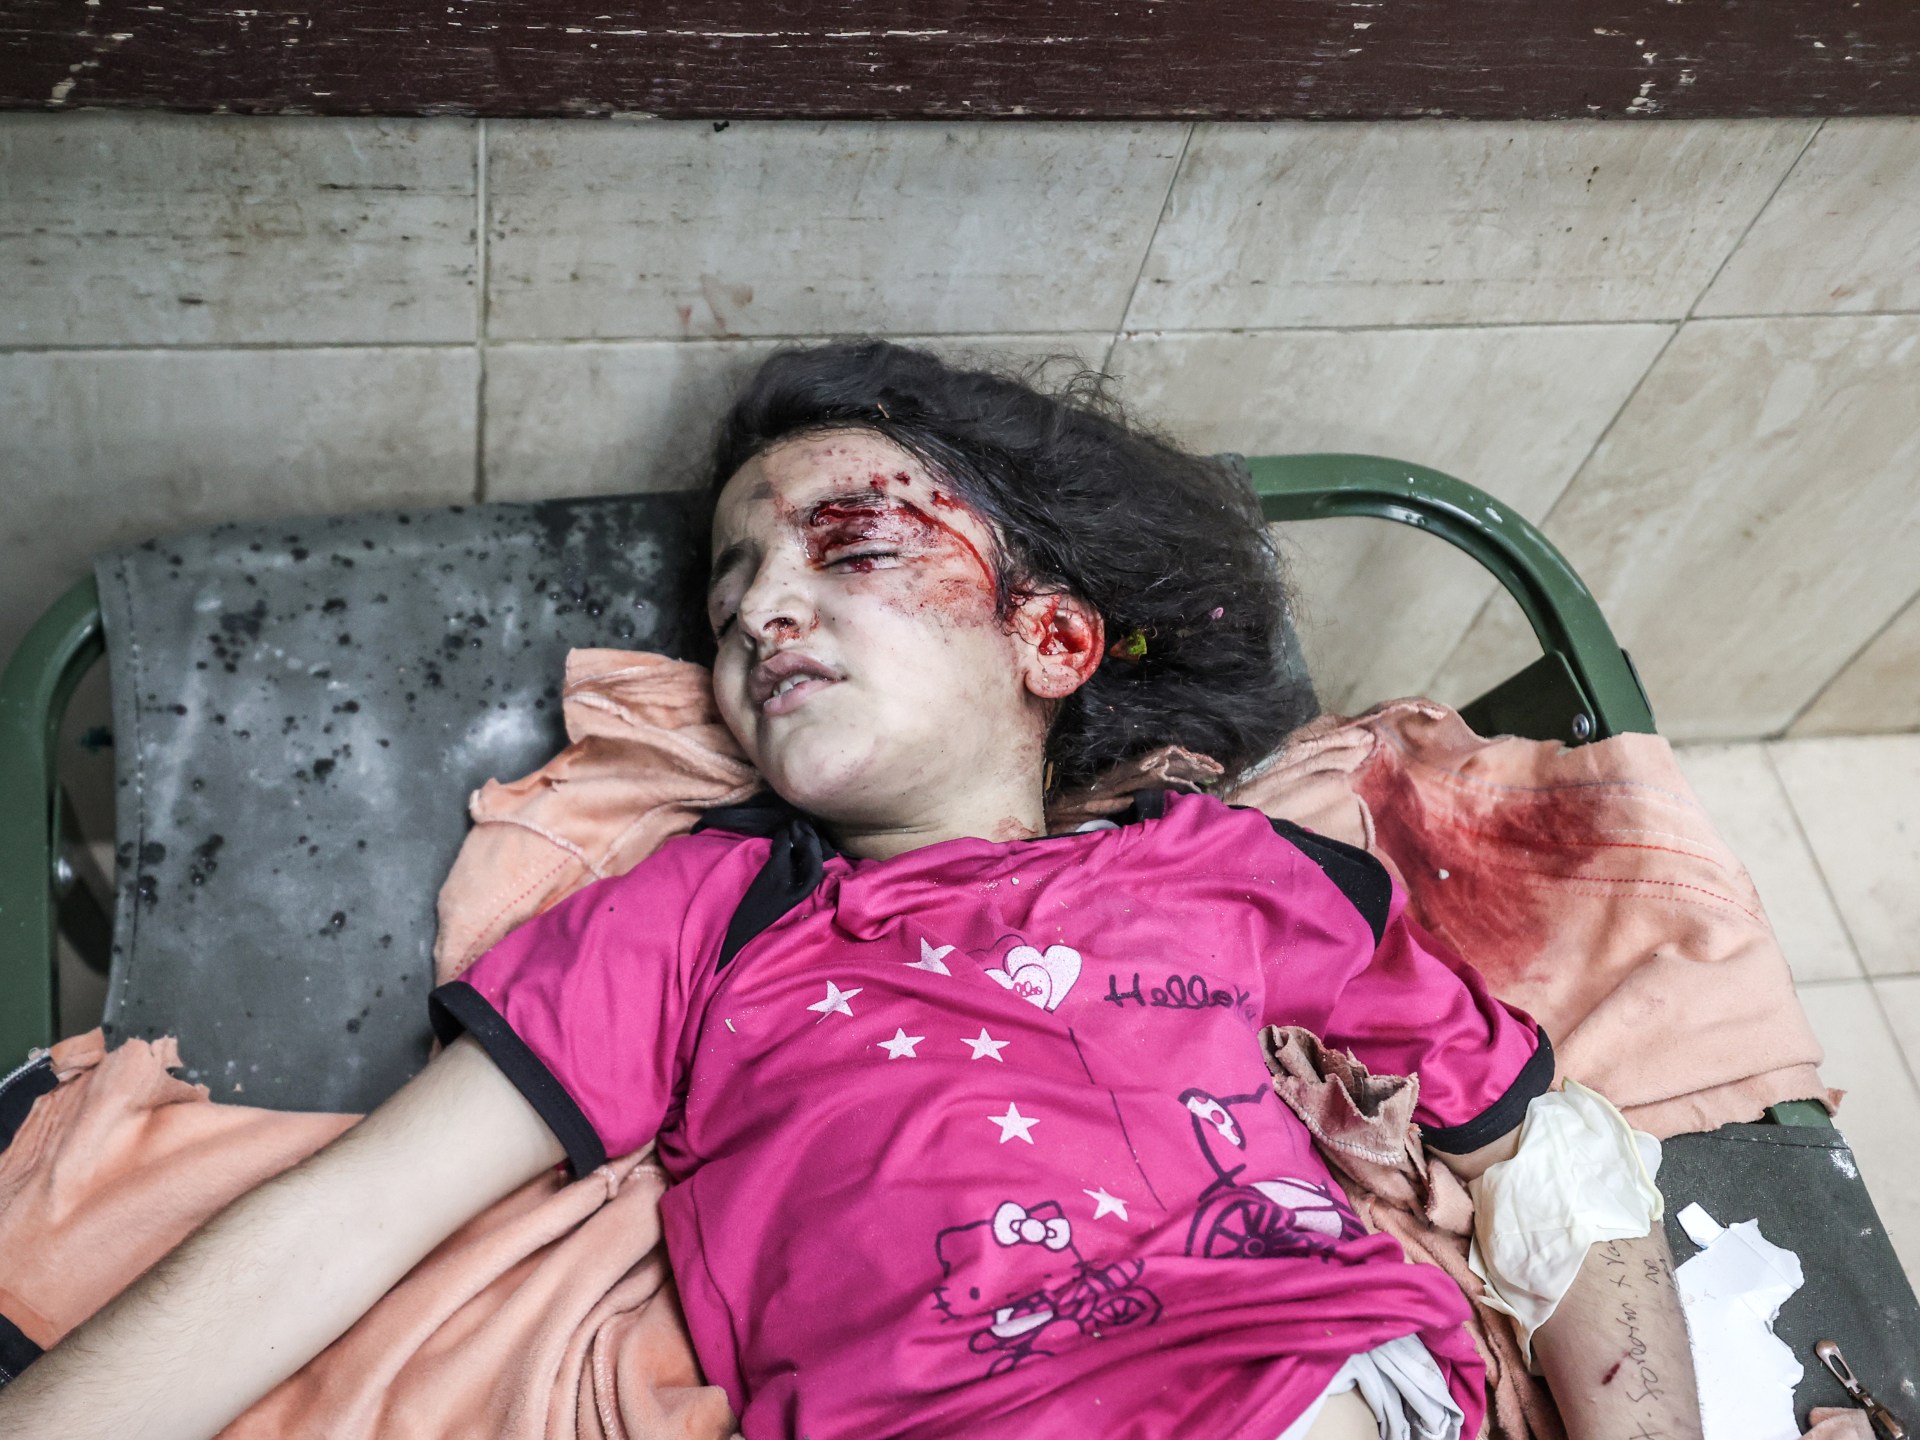 No end to suffering of Gaza children as Israeli attacks rage on | Israel-Palestine conflict News